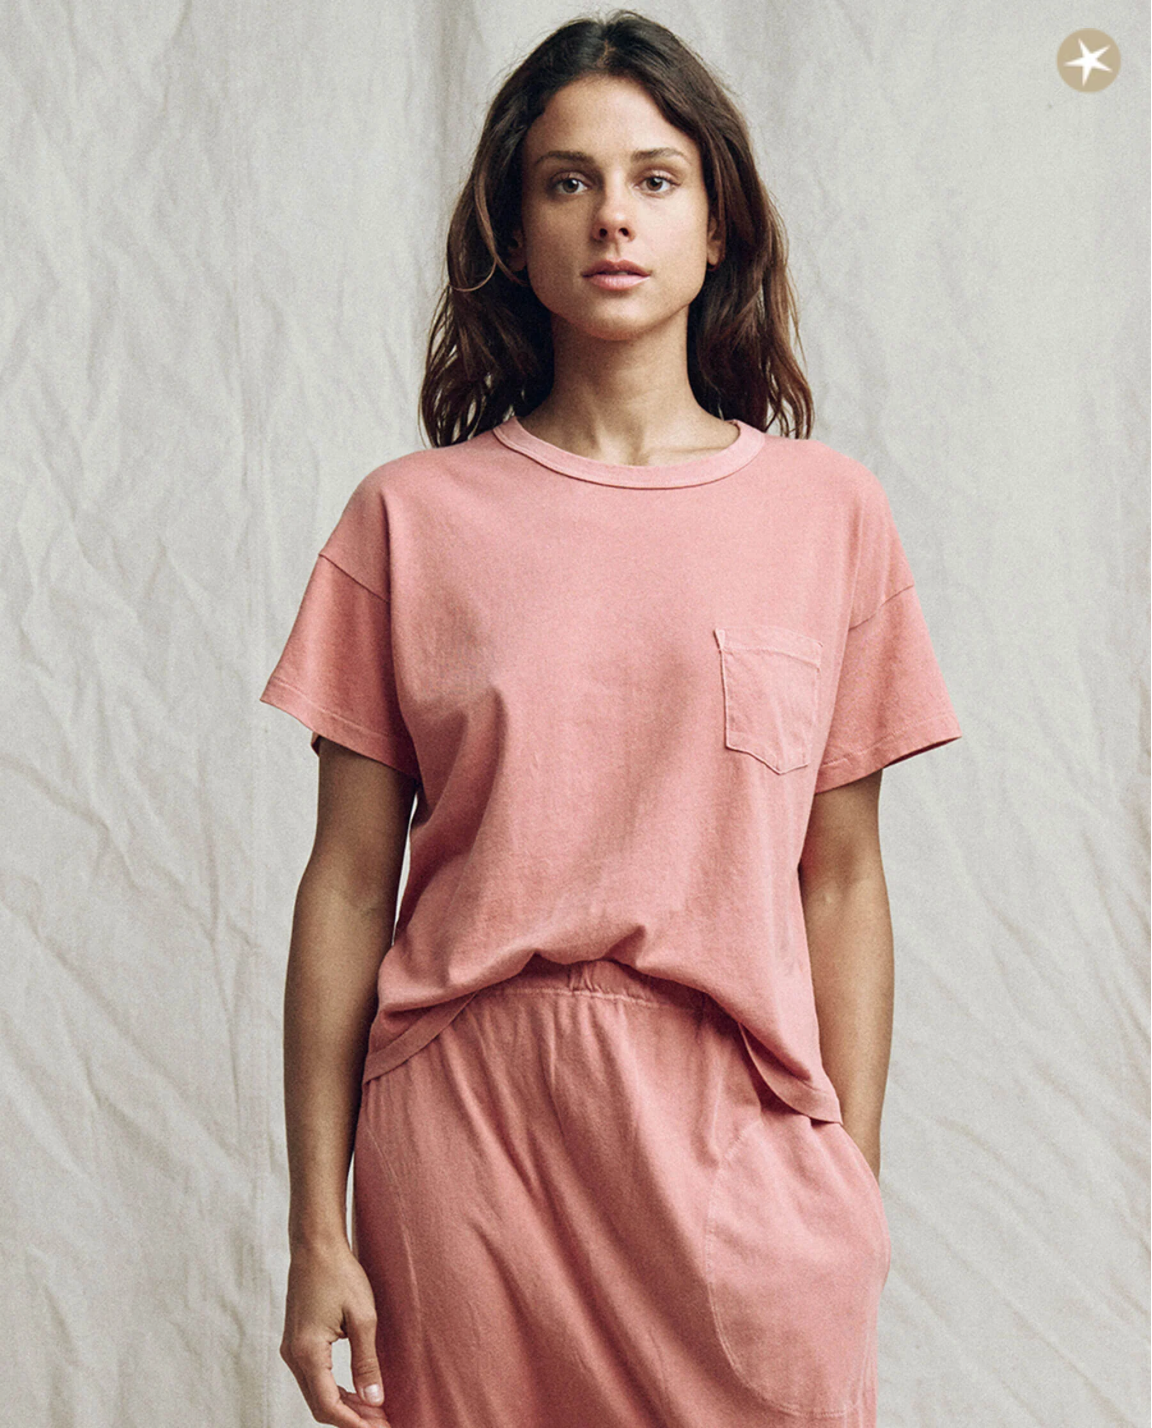 The Pocket Tee. Rose